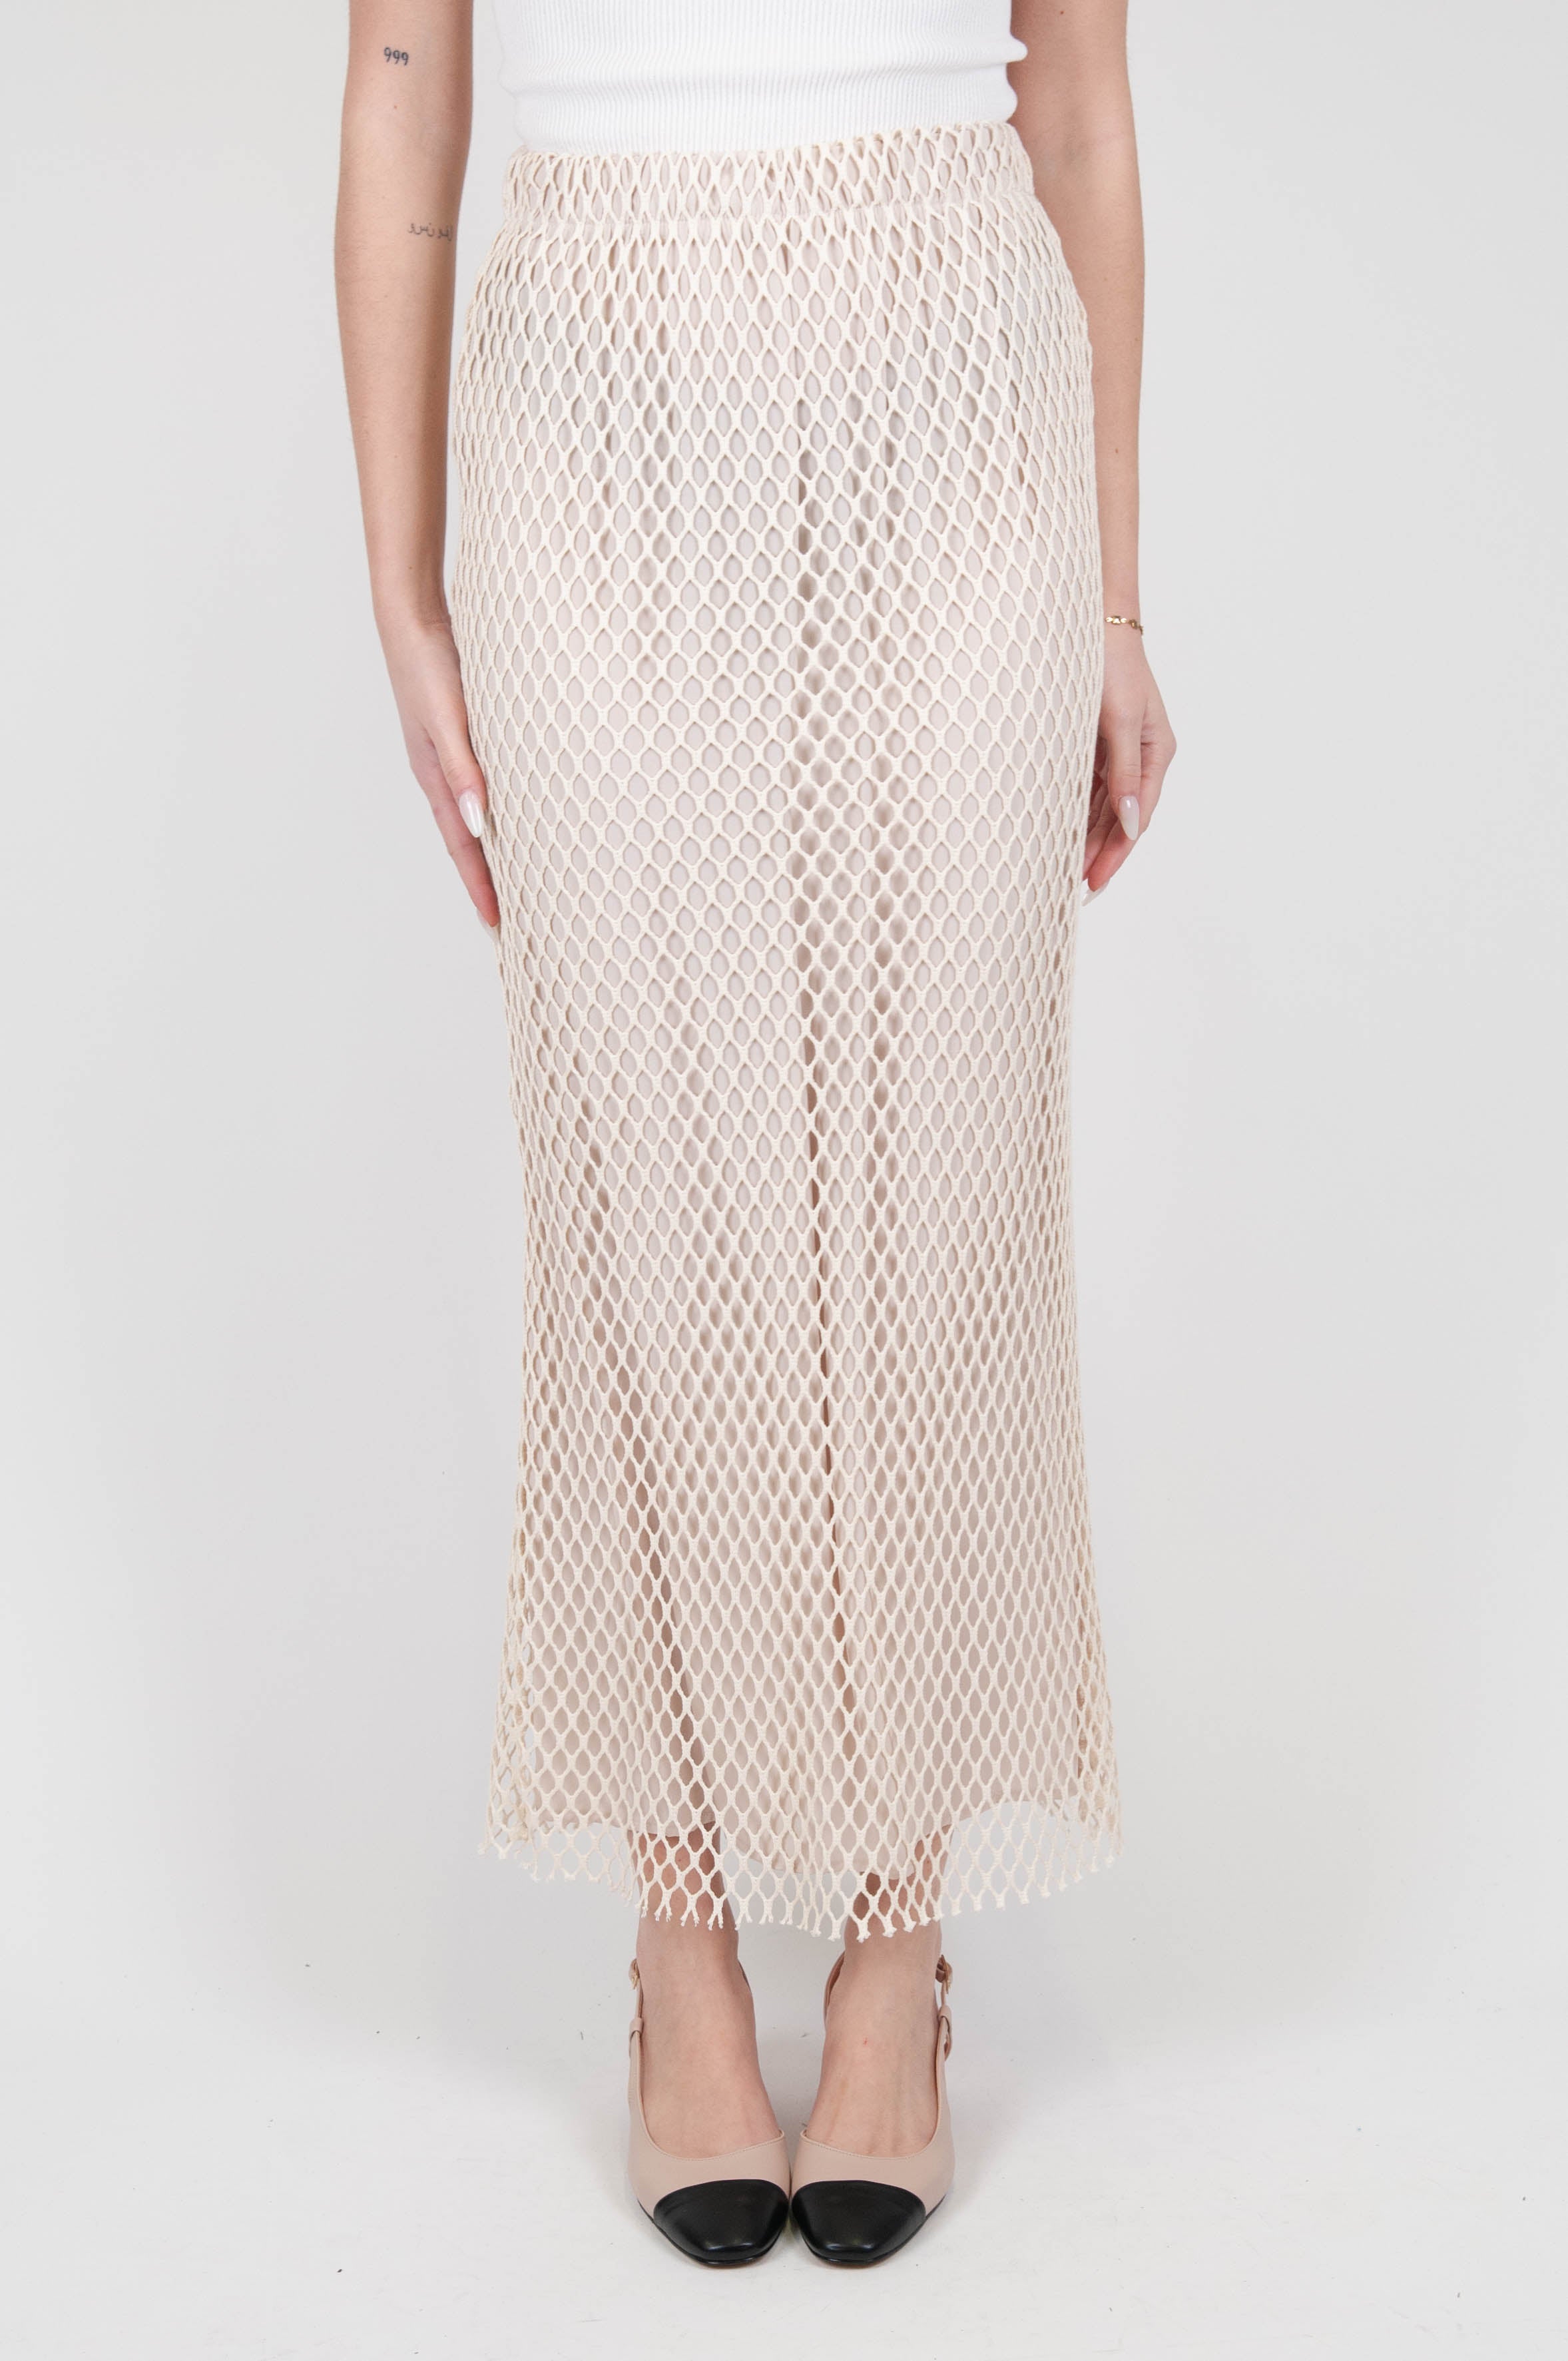 Haveone - Skirt lined with mesh and slit on the back